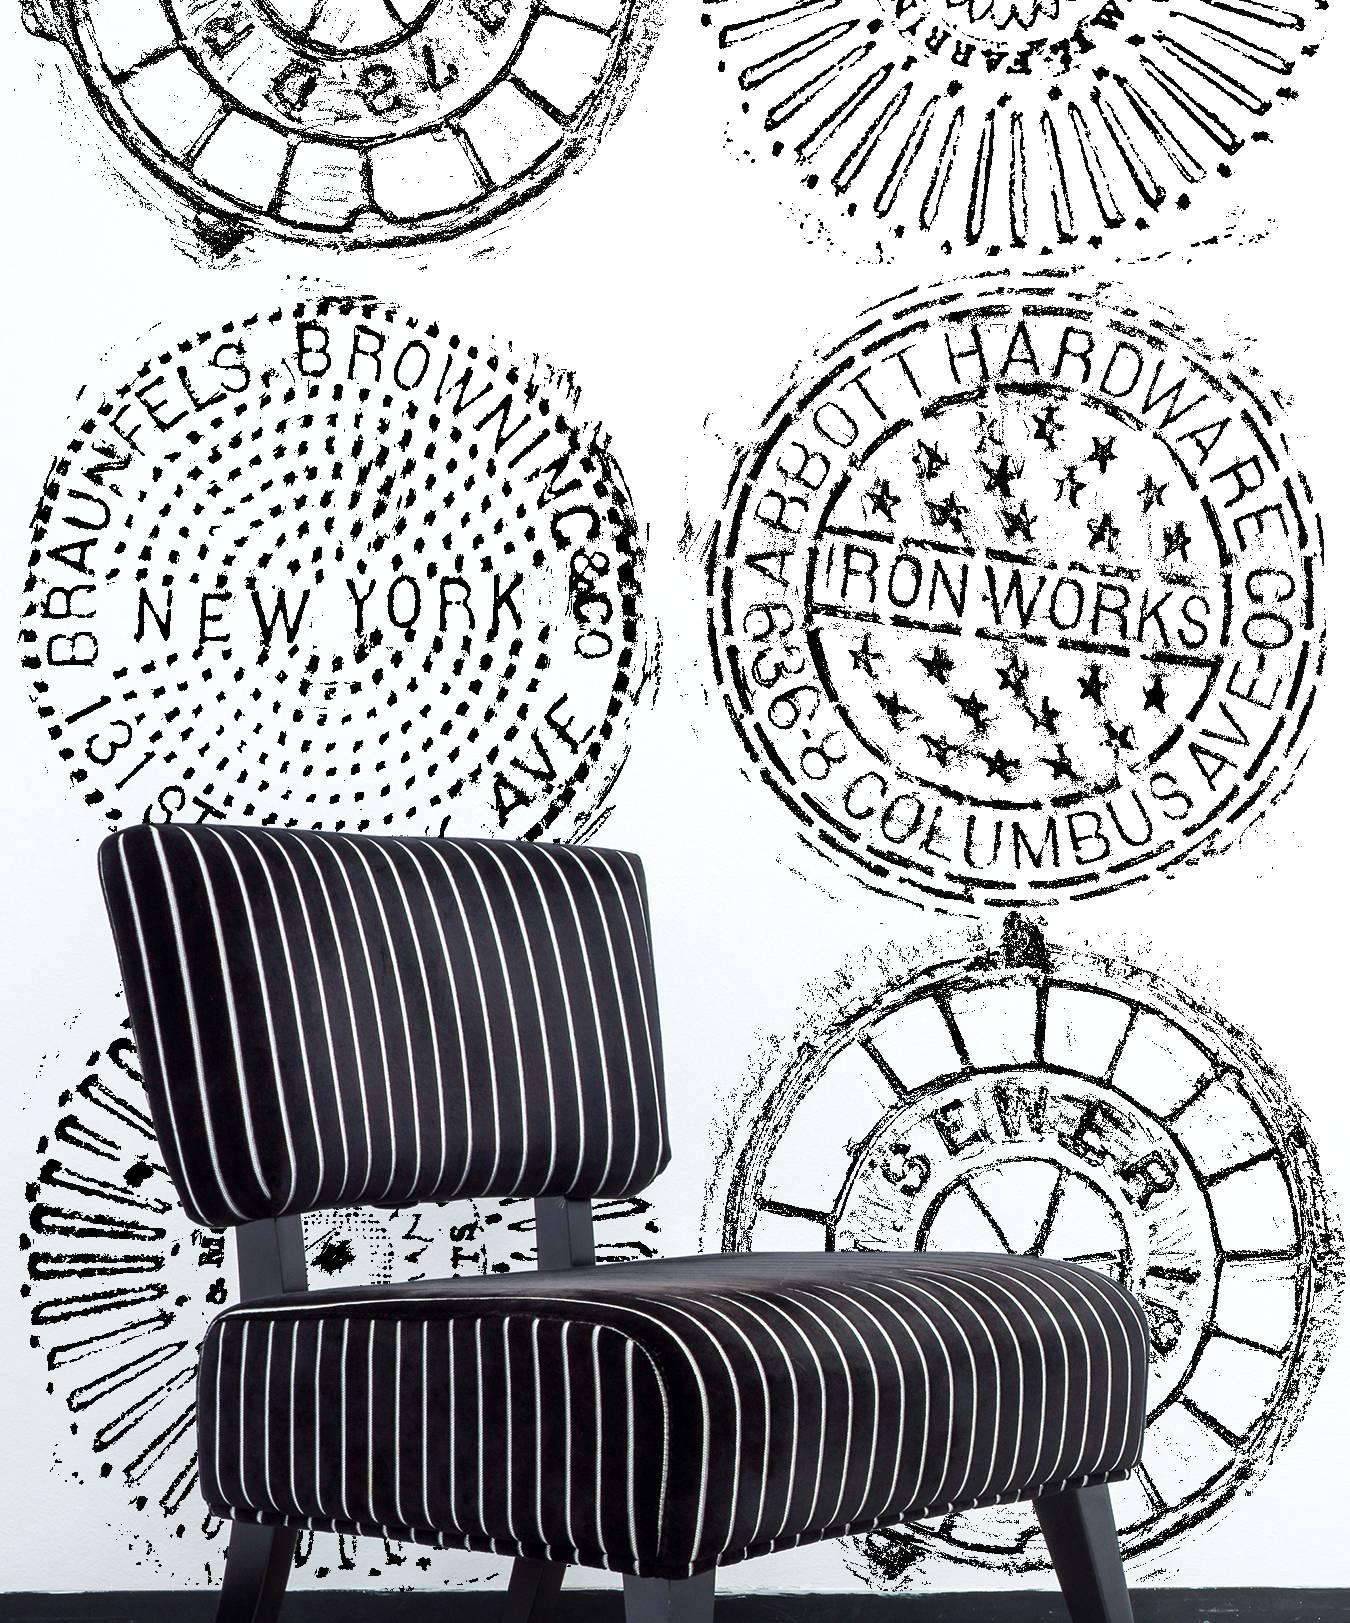 American NYC Manhole Printed Wallpaper, Black on White Manhole Cover For Sale